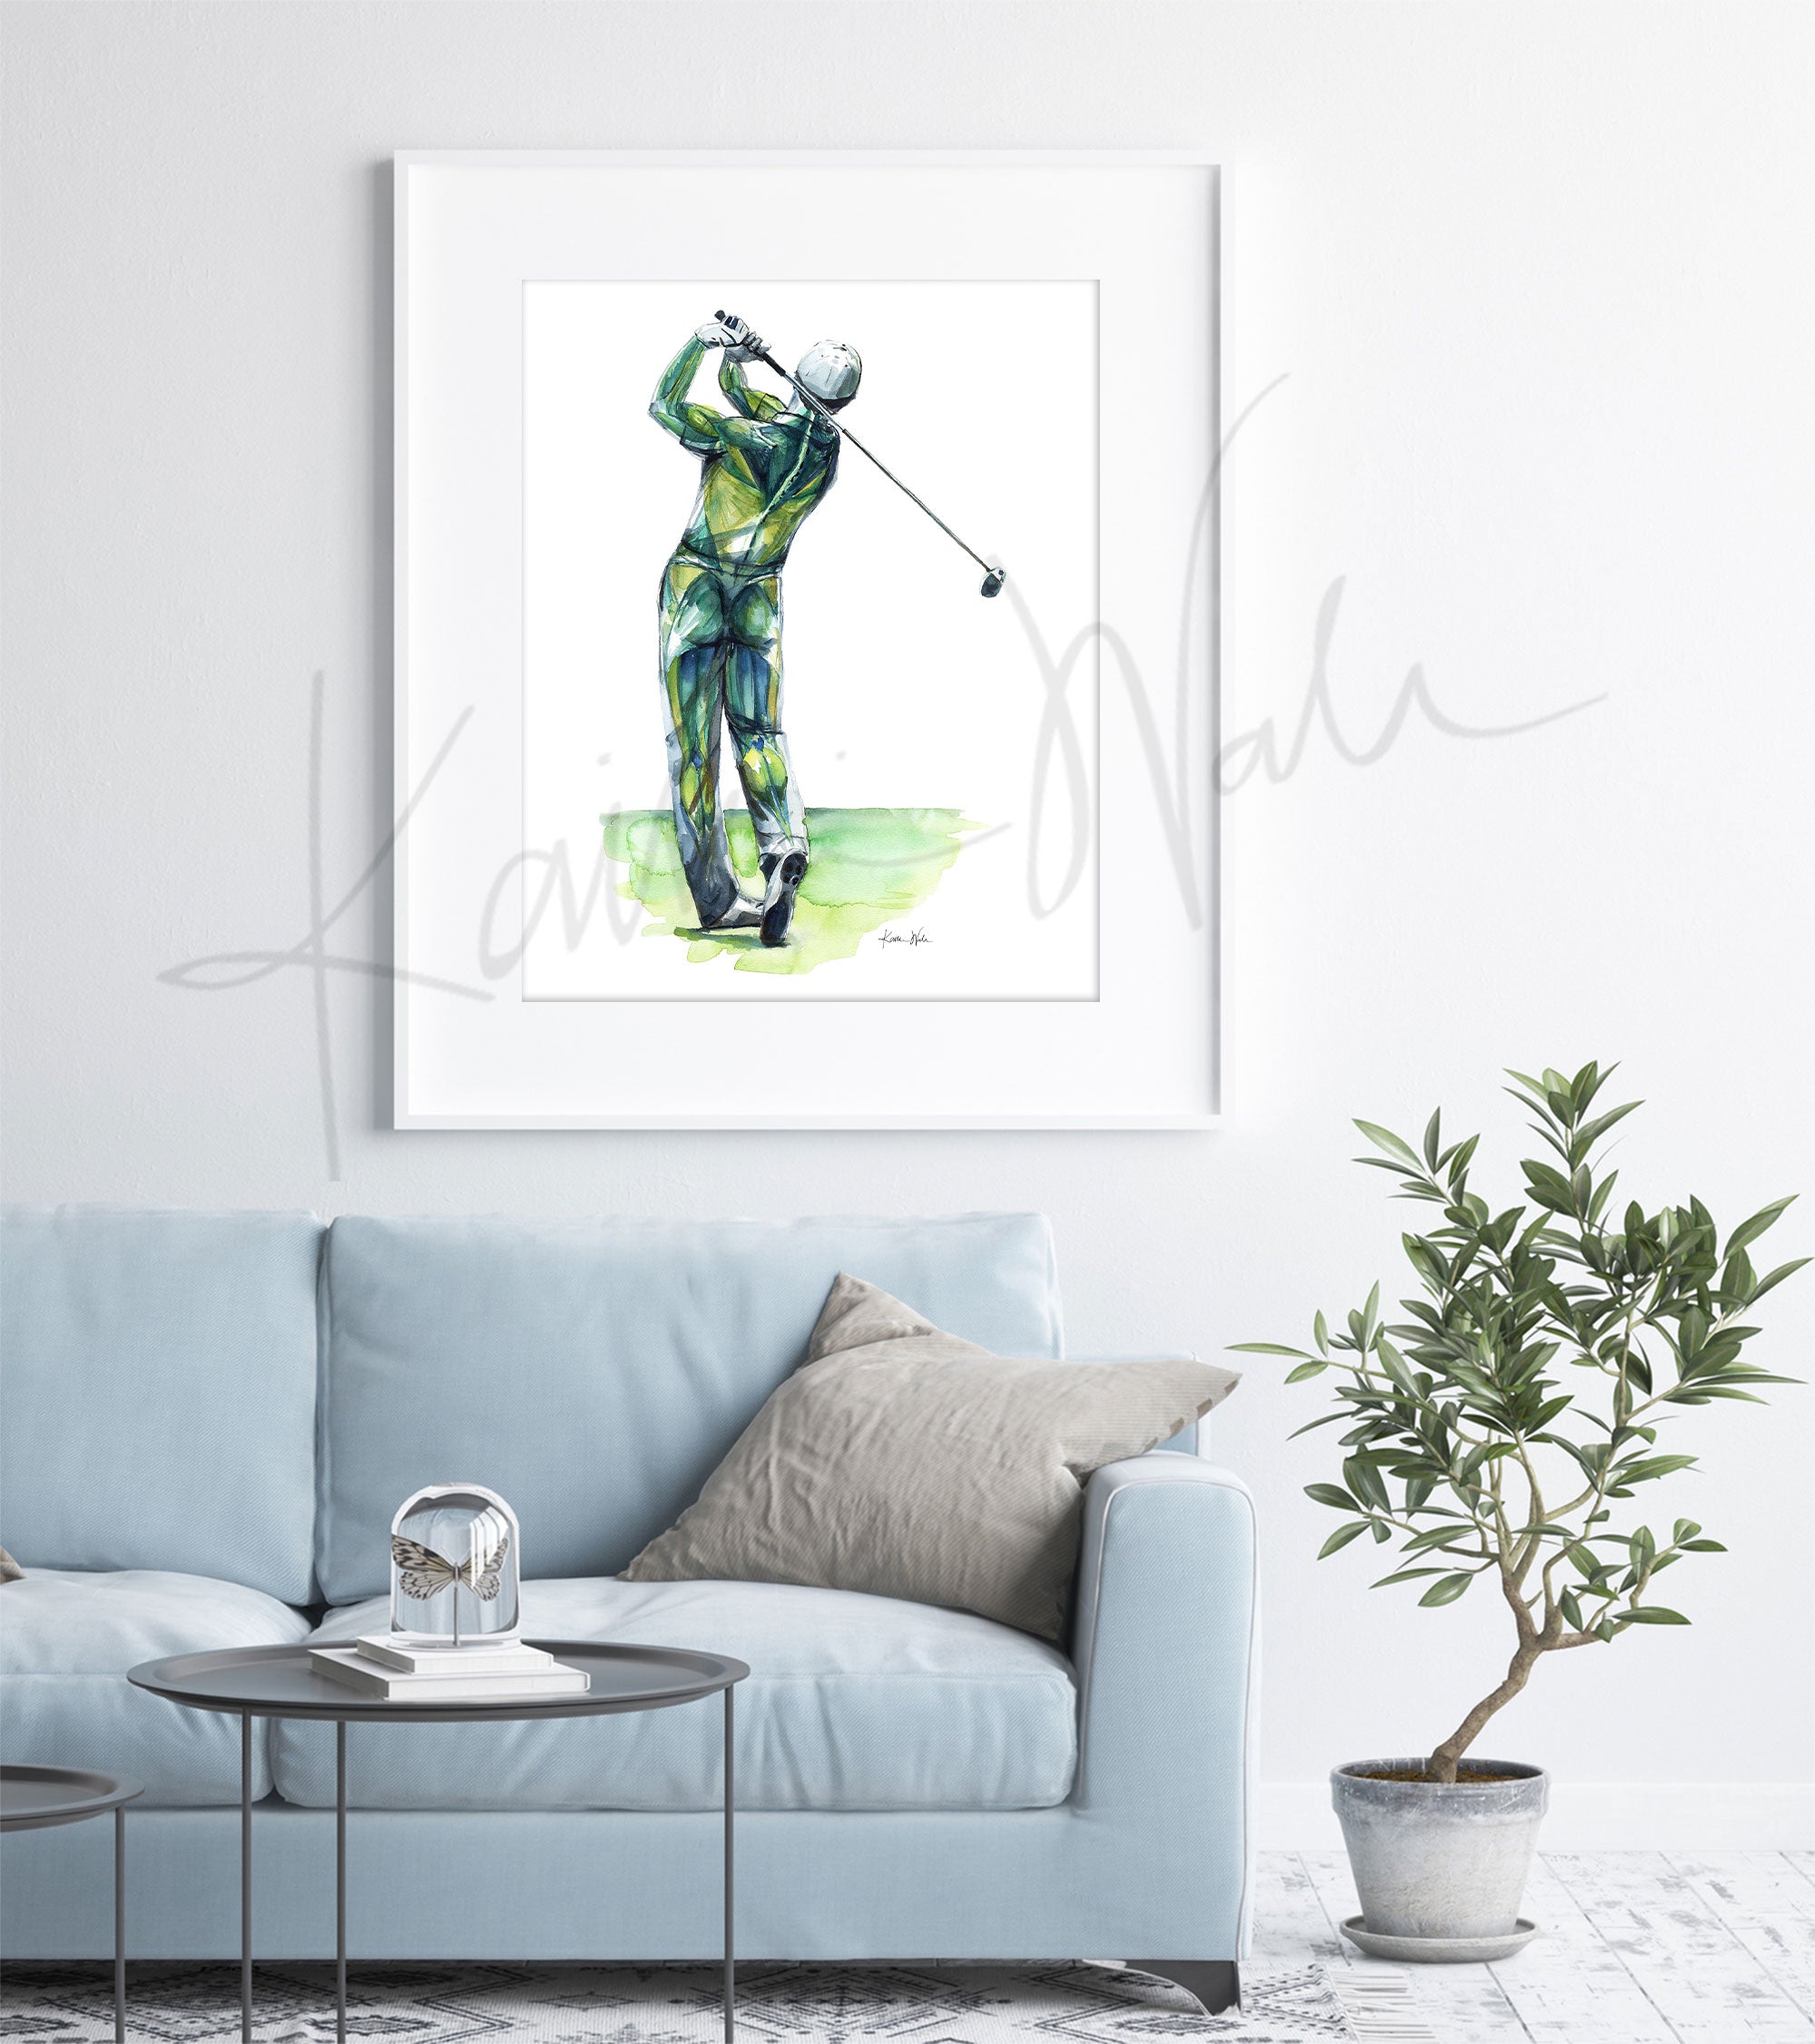 Framed watercolor painting of a golfer’s anatomy during a golf swing. The painting is hanging over a blue couch.